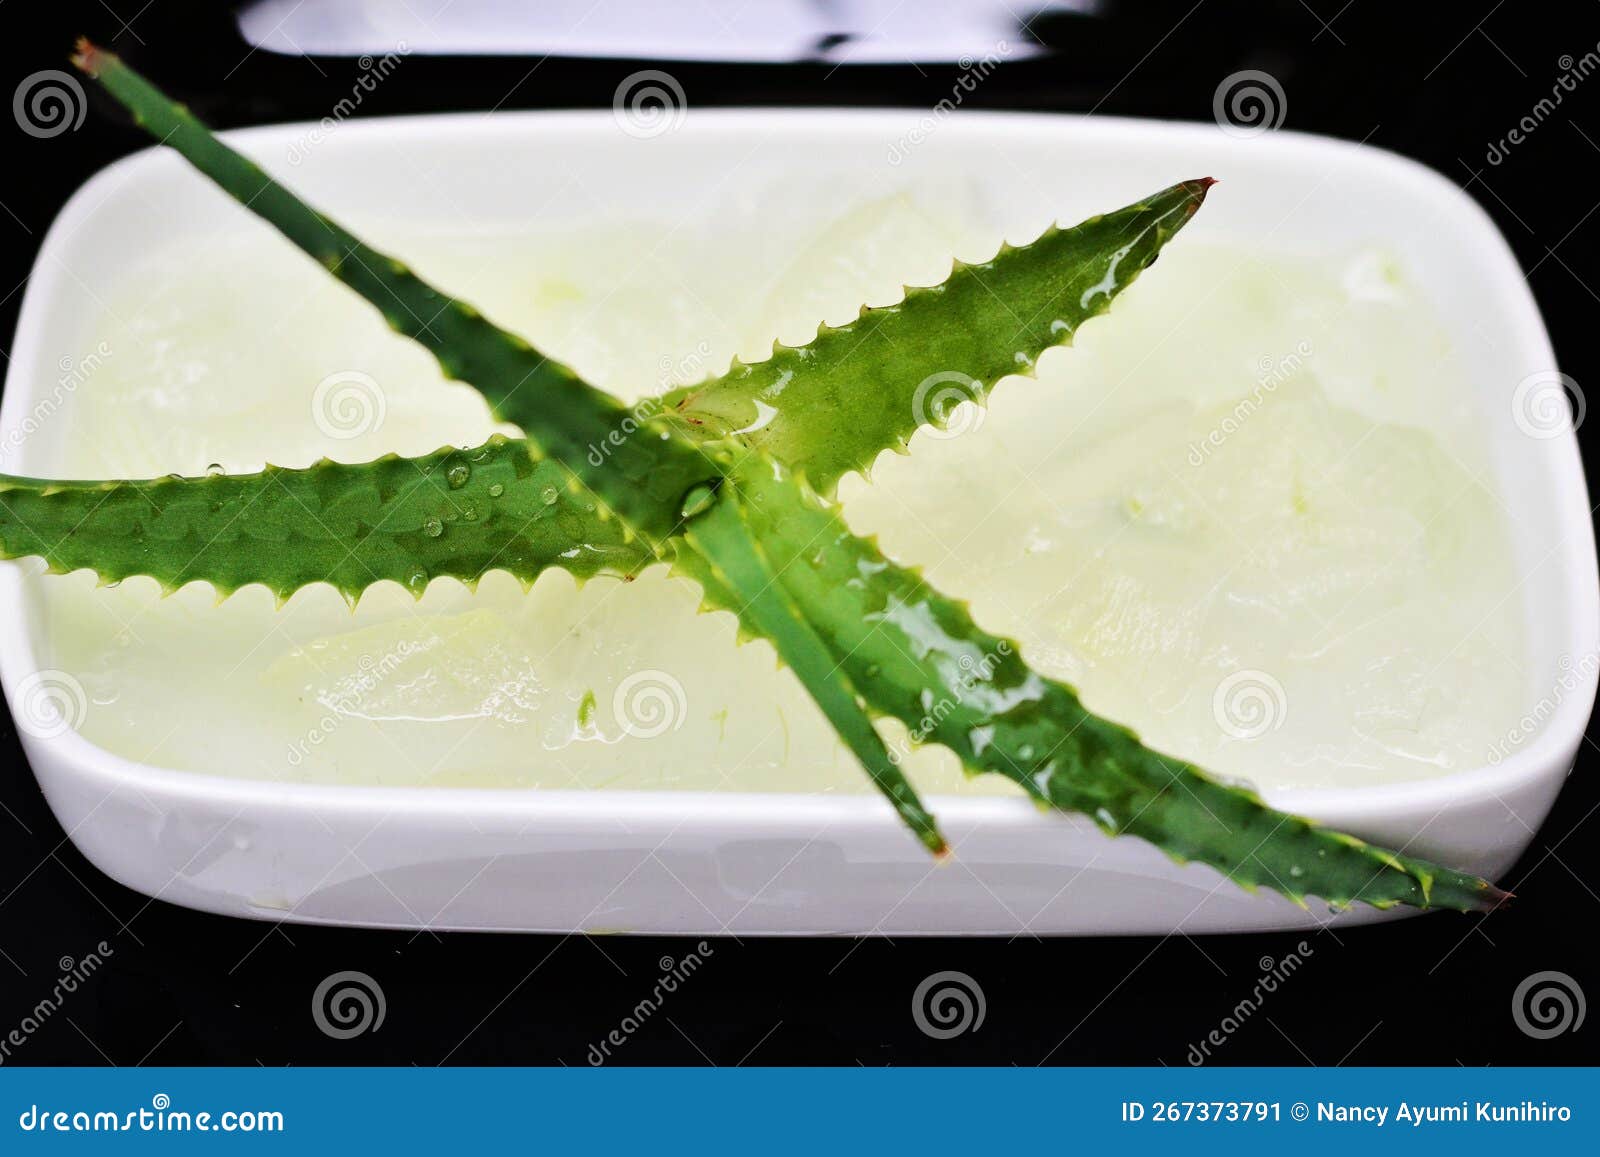 bowl with juice taken from aloe vera leaves